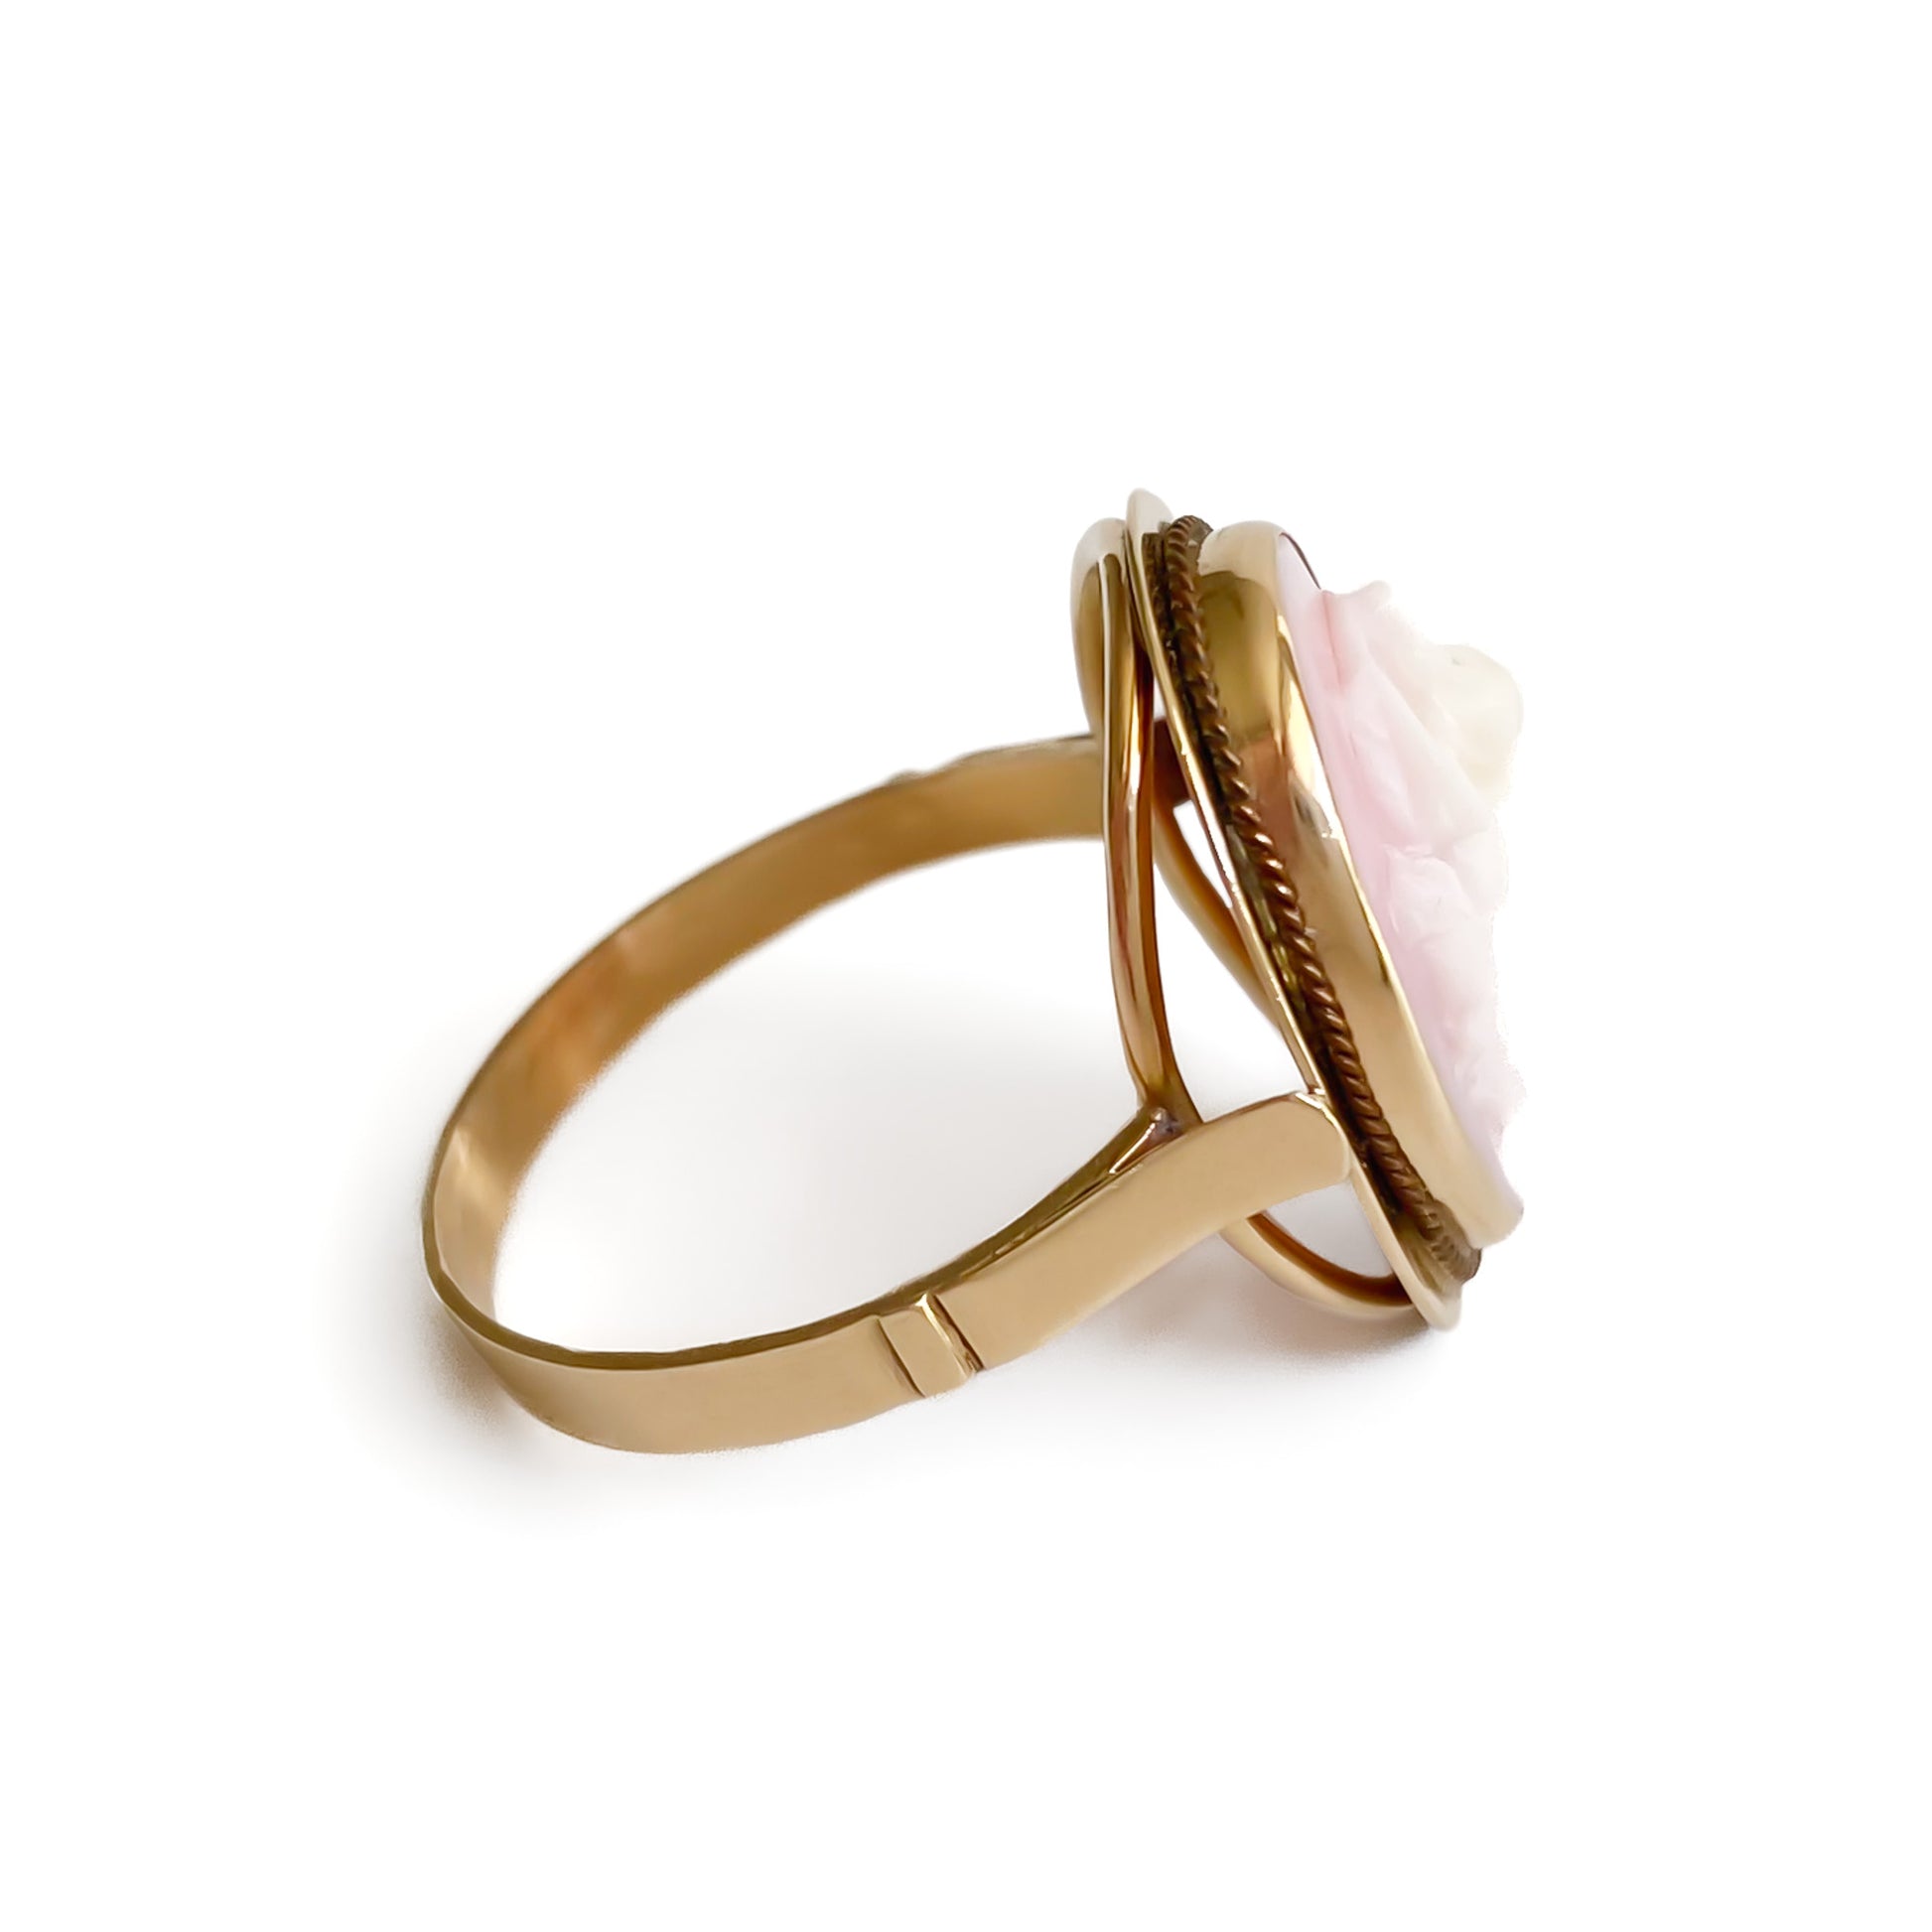 Pretty vintage 9ct yellow gold ring set with a beautifully carved rose cameo.